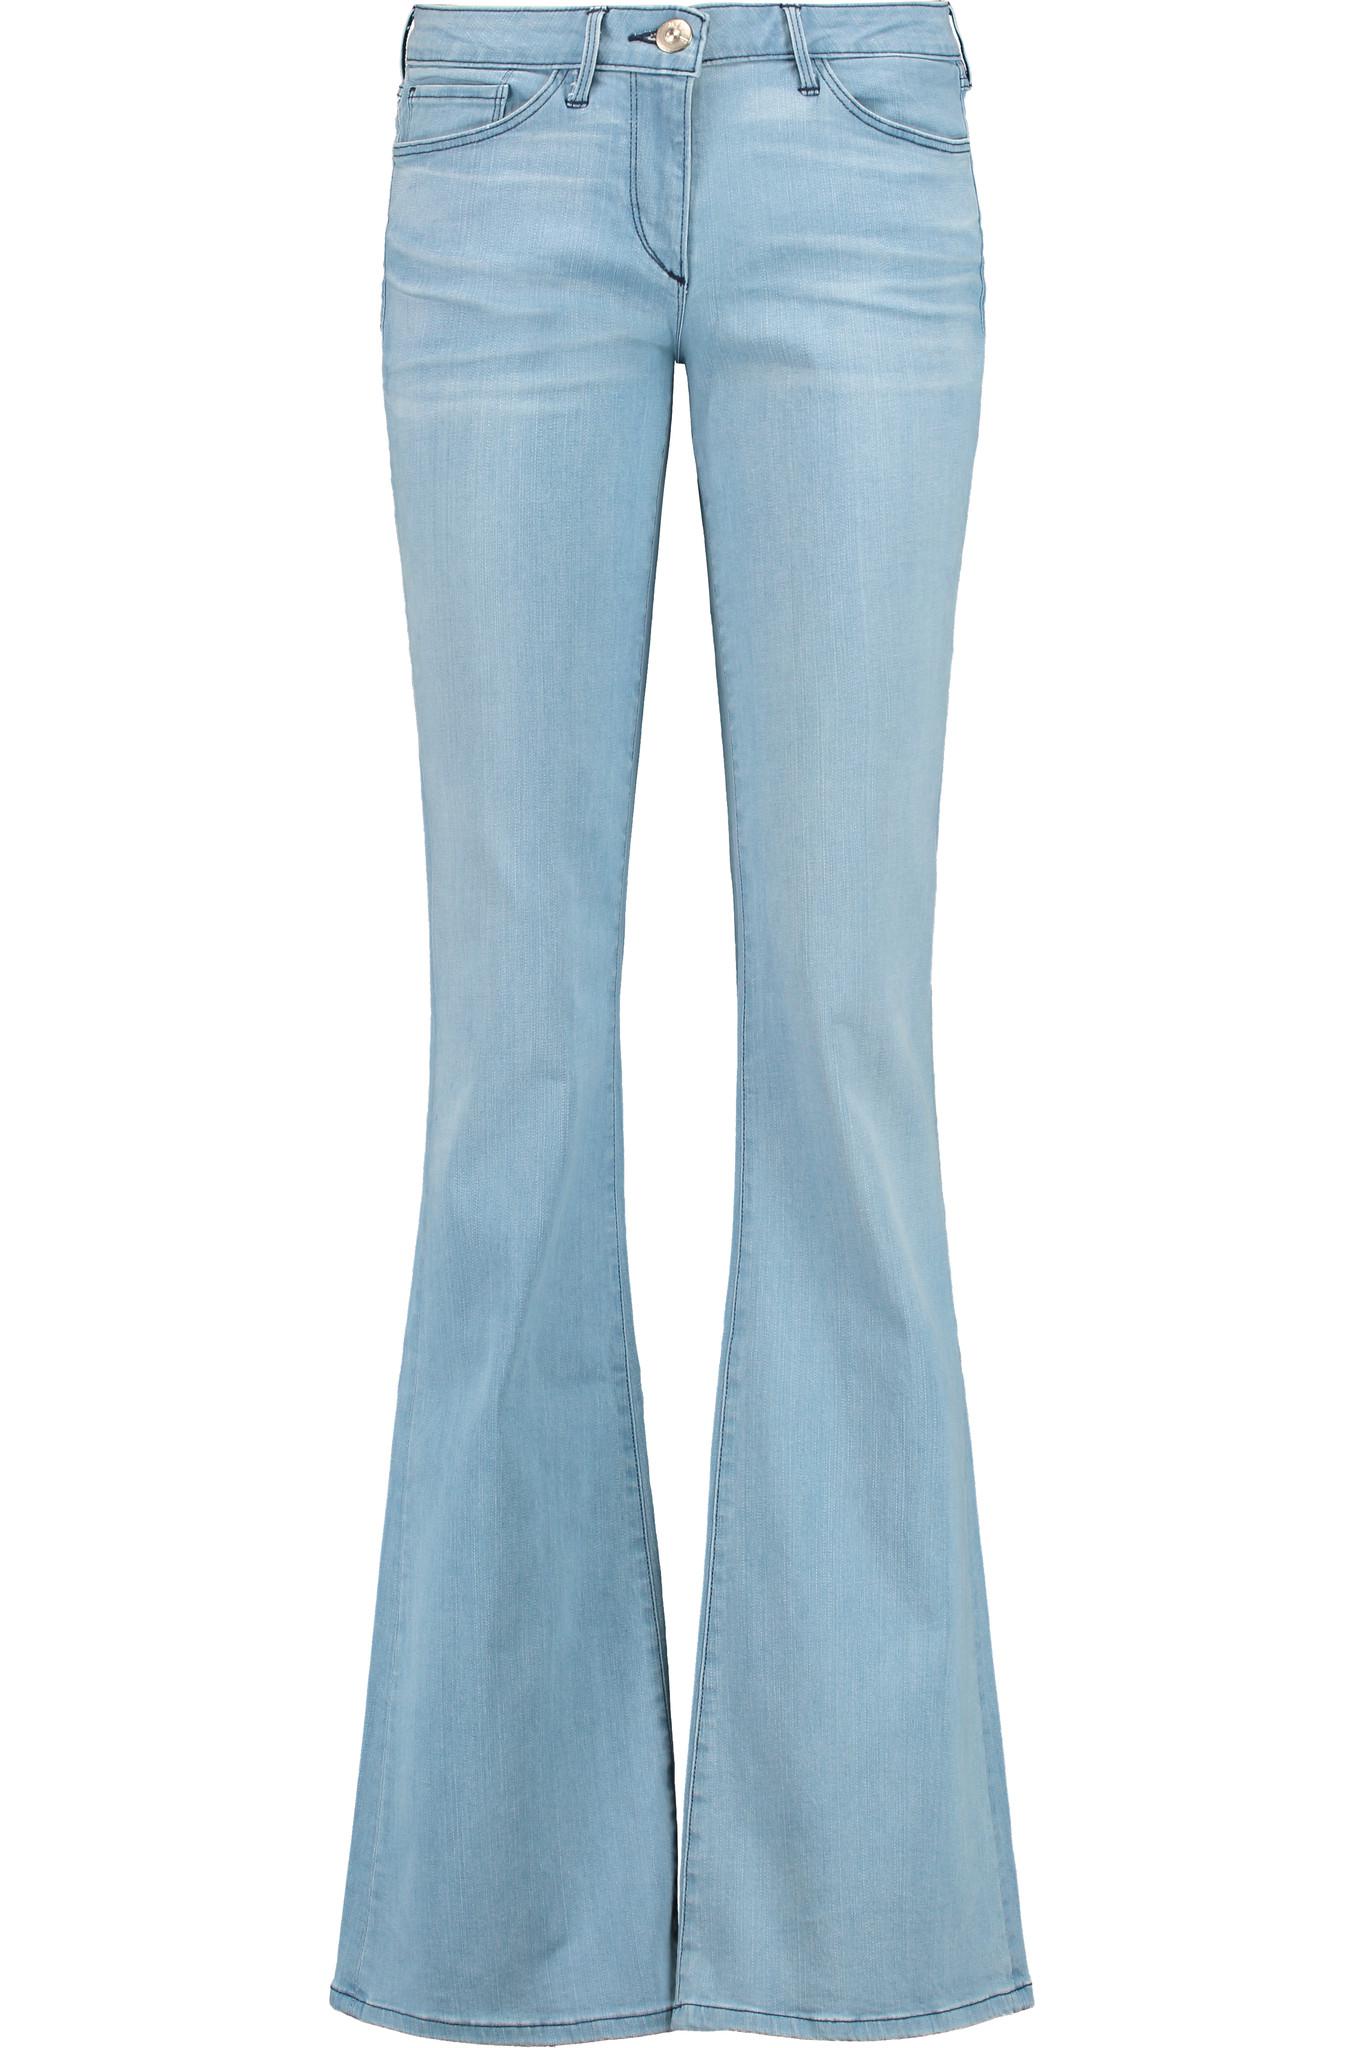 Lyst - 3x1 Low-rise Flared Jeans in Blue